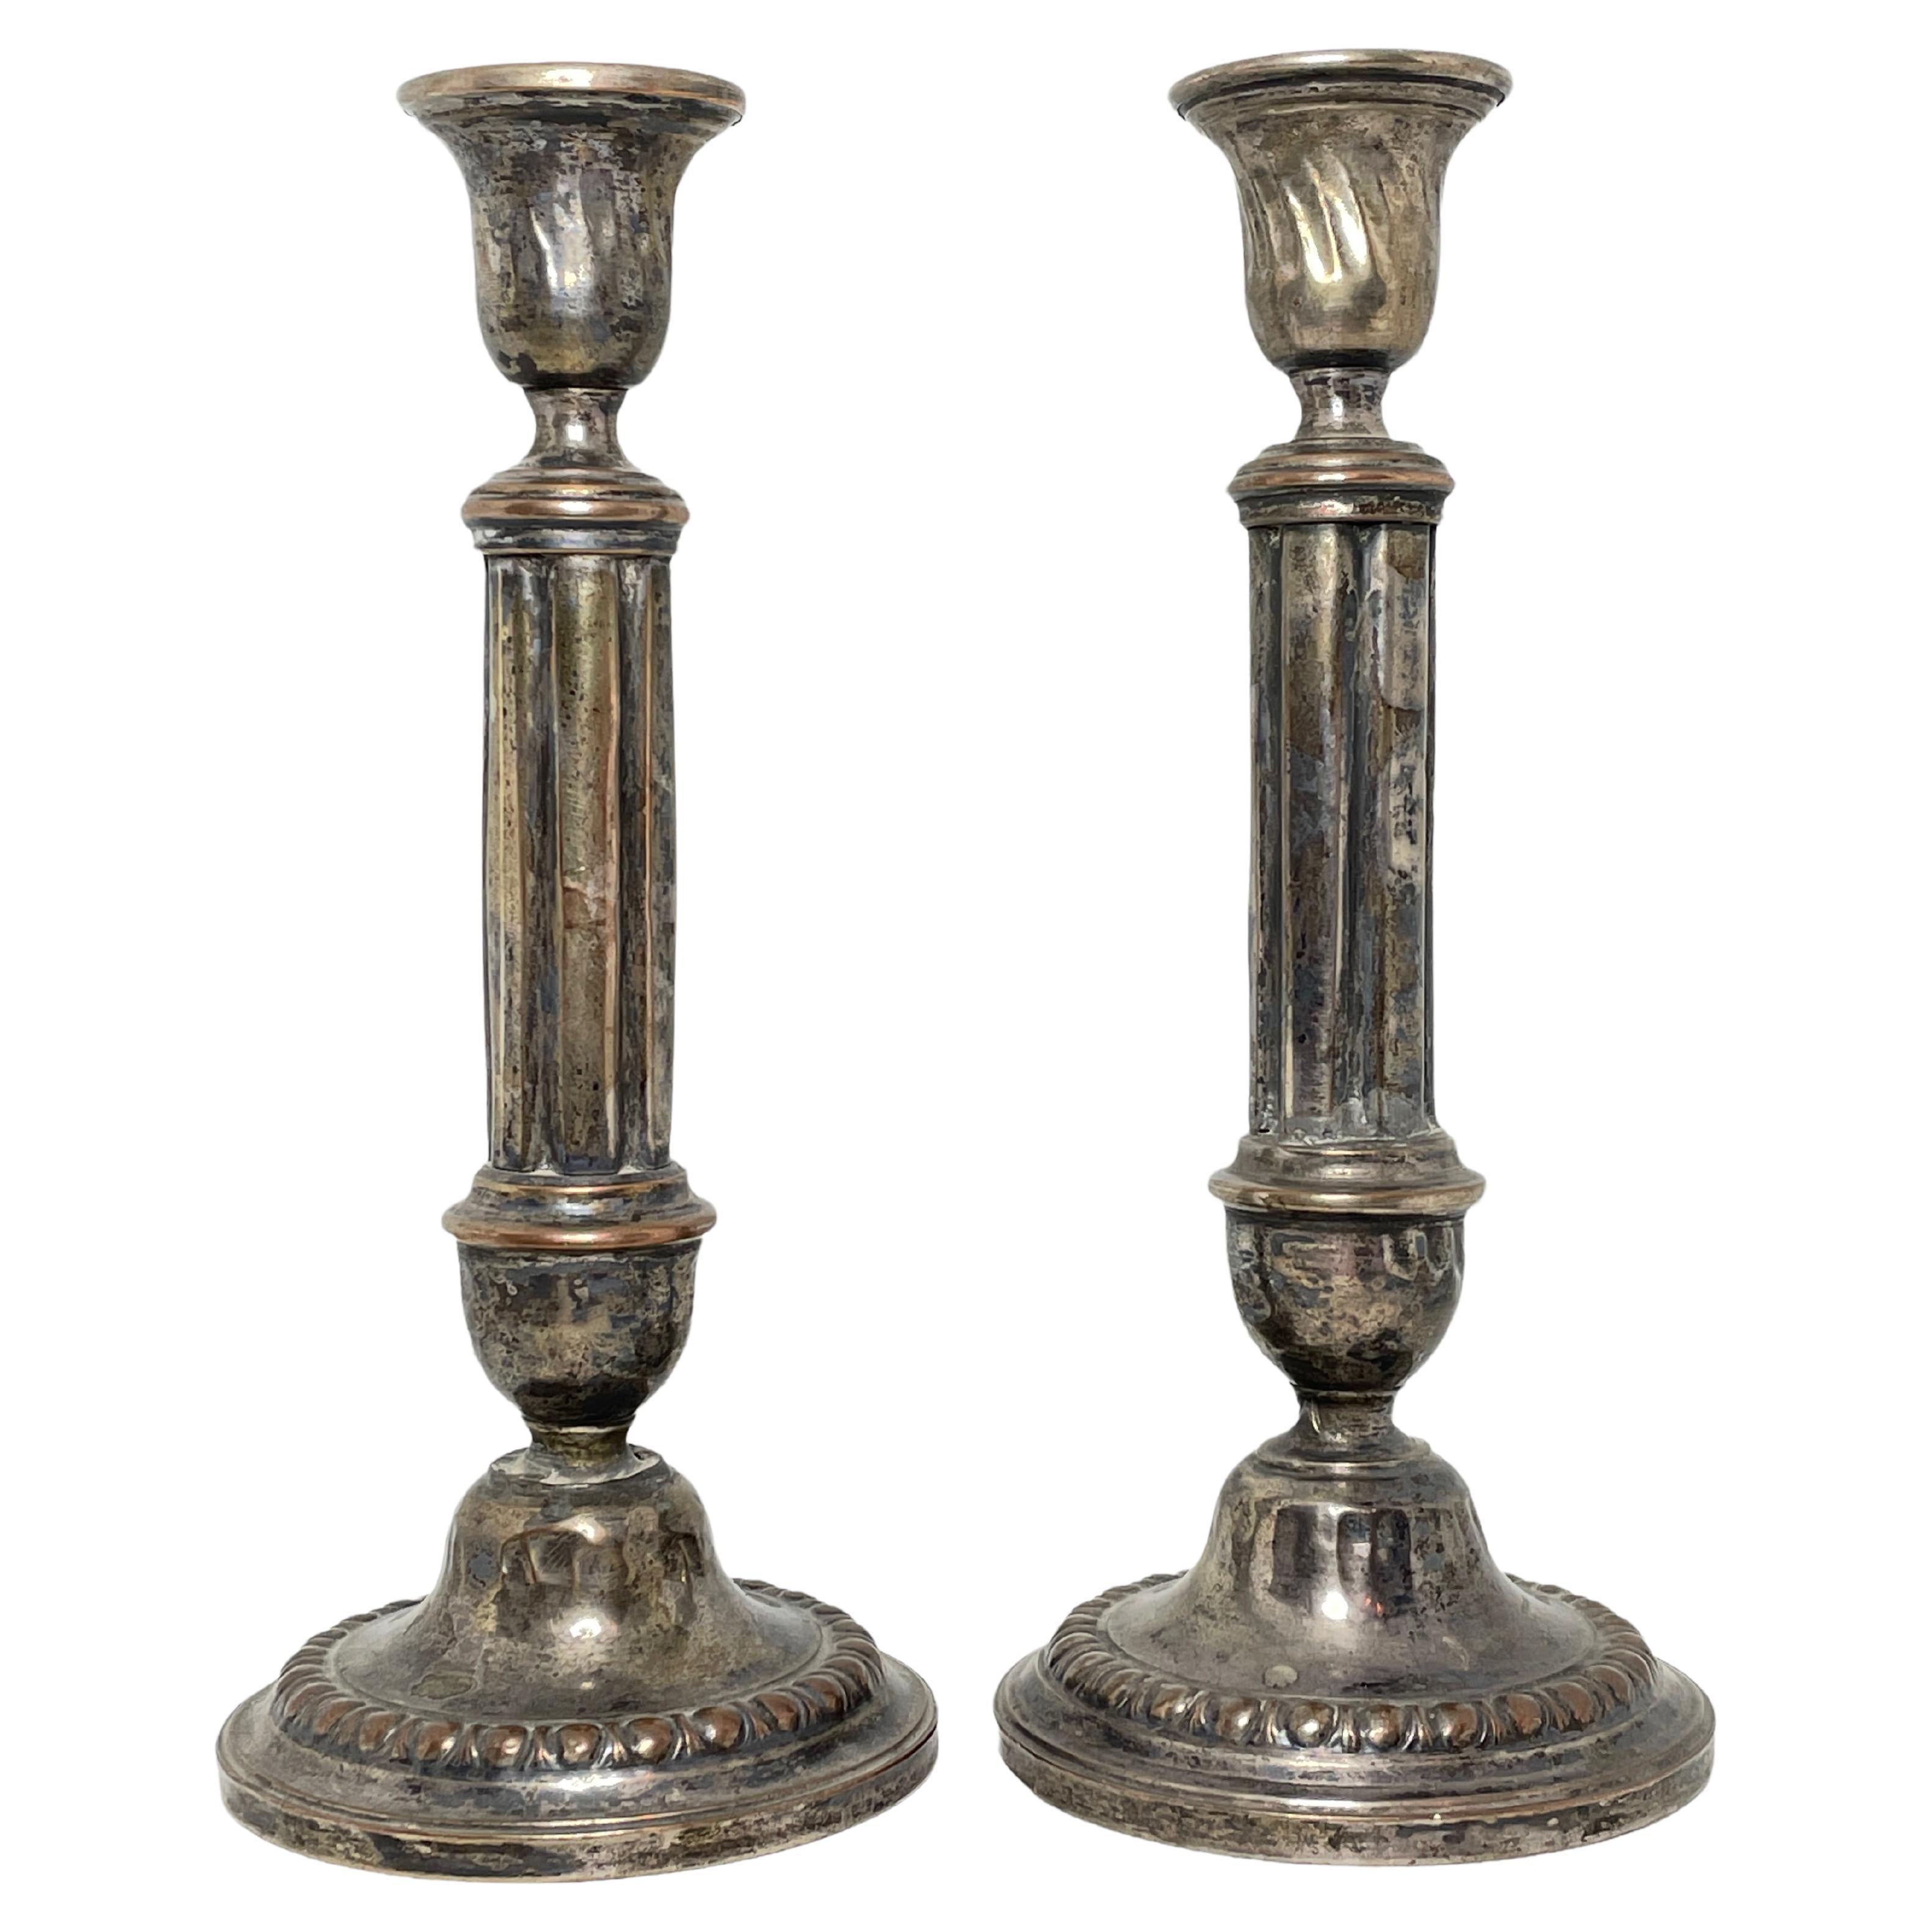 Pair of Victorian Candlesticks Candleholders Antique, German, 1880s